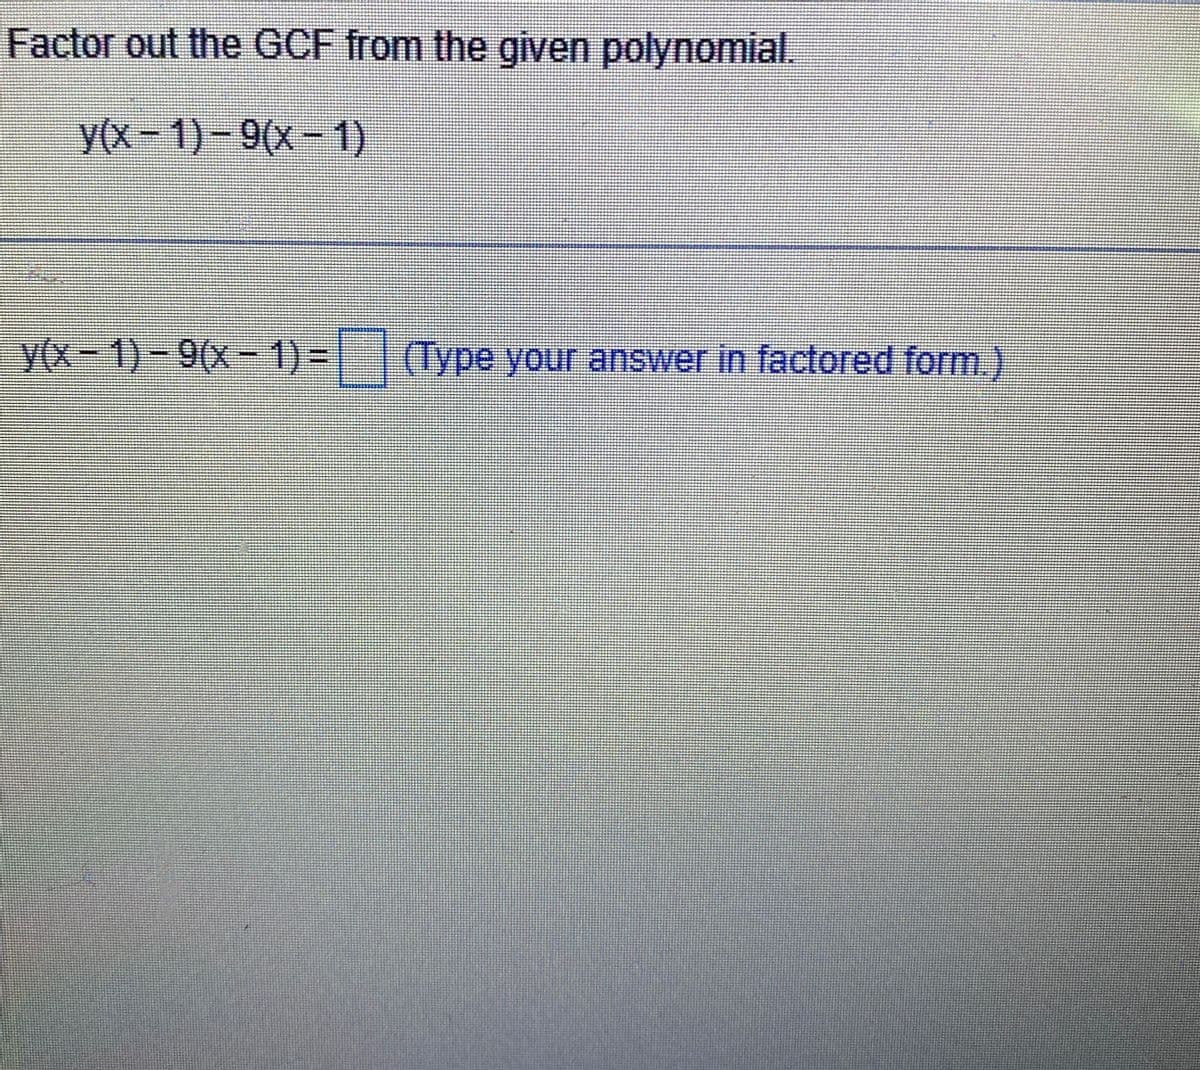 Factor out the GCF from the given polynomial.
y(x-1)-9(x-1)
Ferrament
y(x-1)-9(x - 1) = (Type your answer in factored form.)